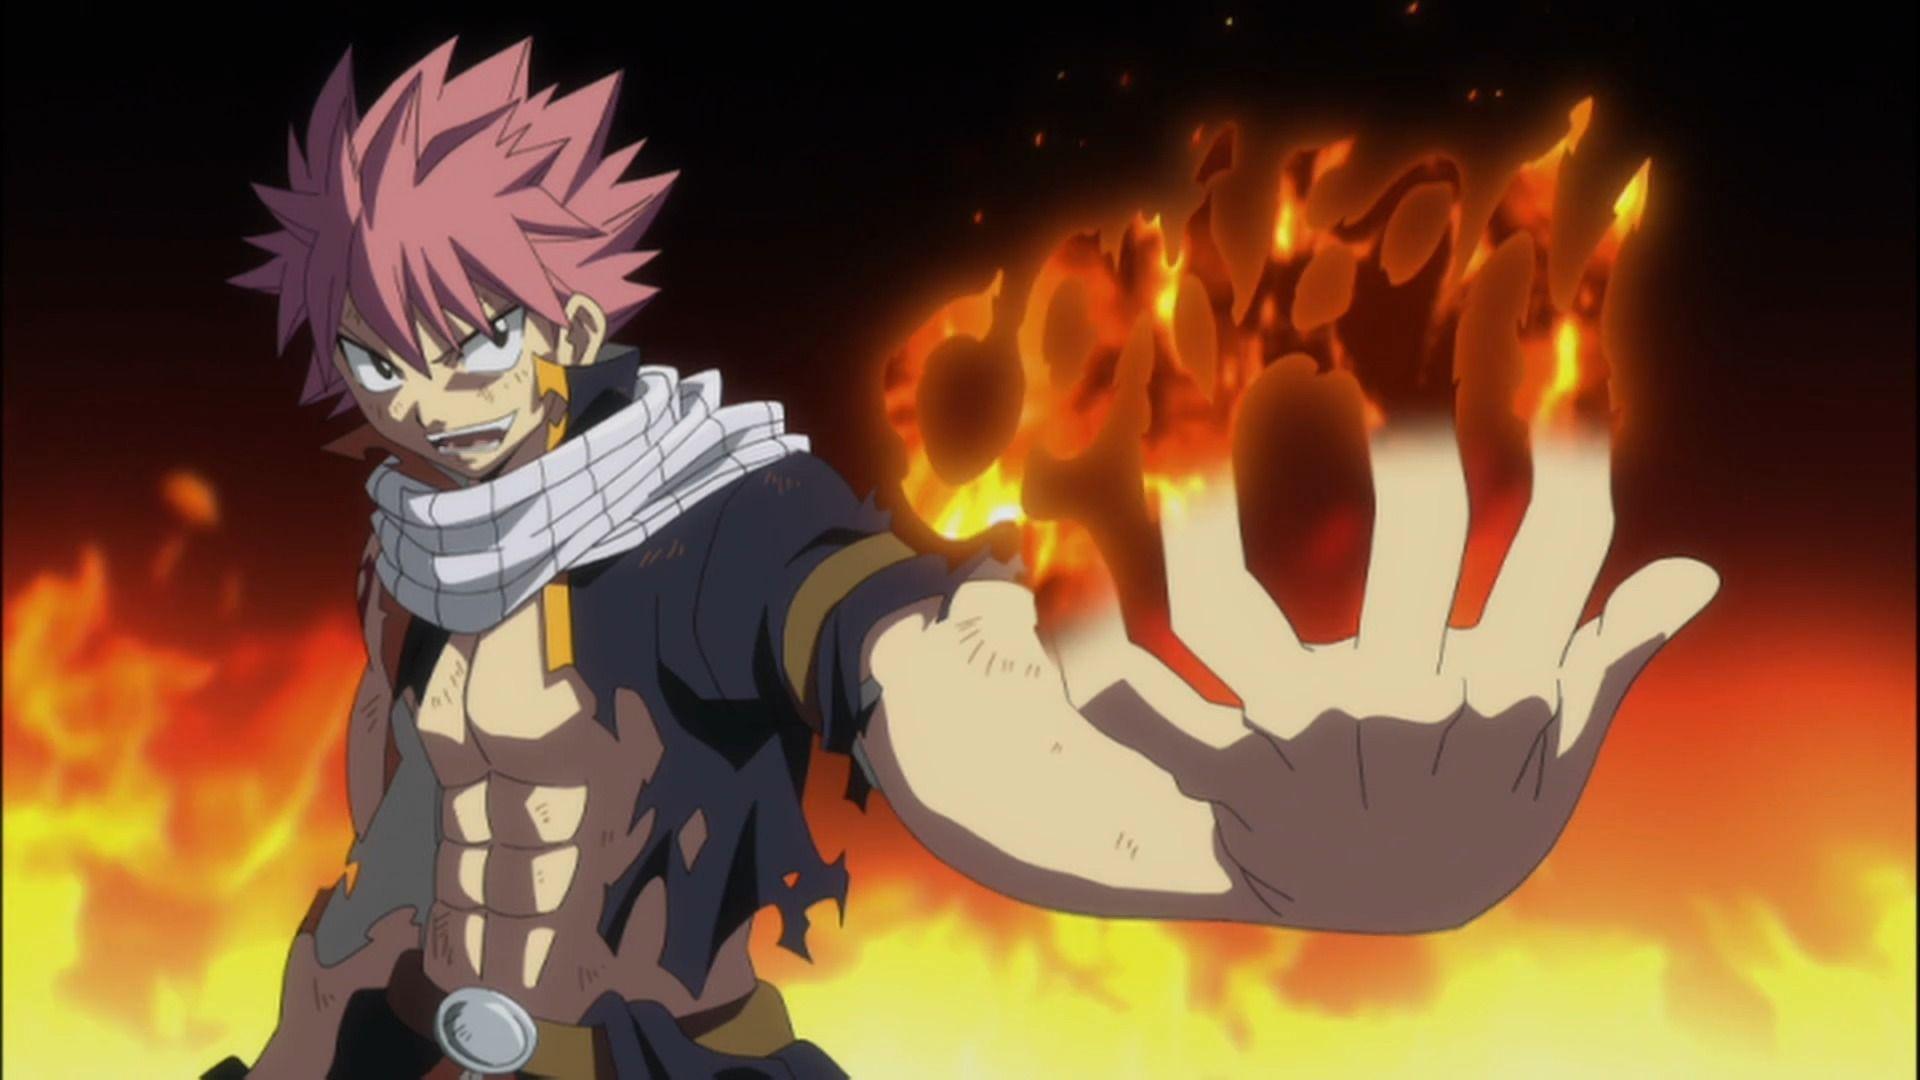 Q4SgQWH Fairy Tail wallpaper HD free wallpaper background image